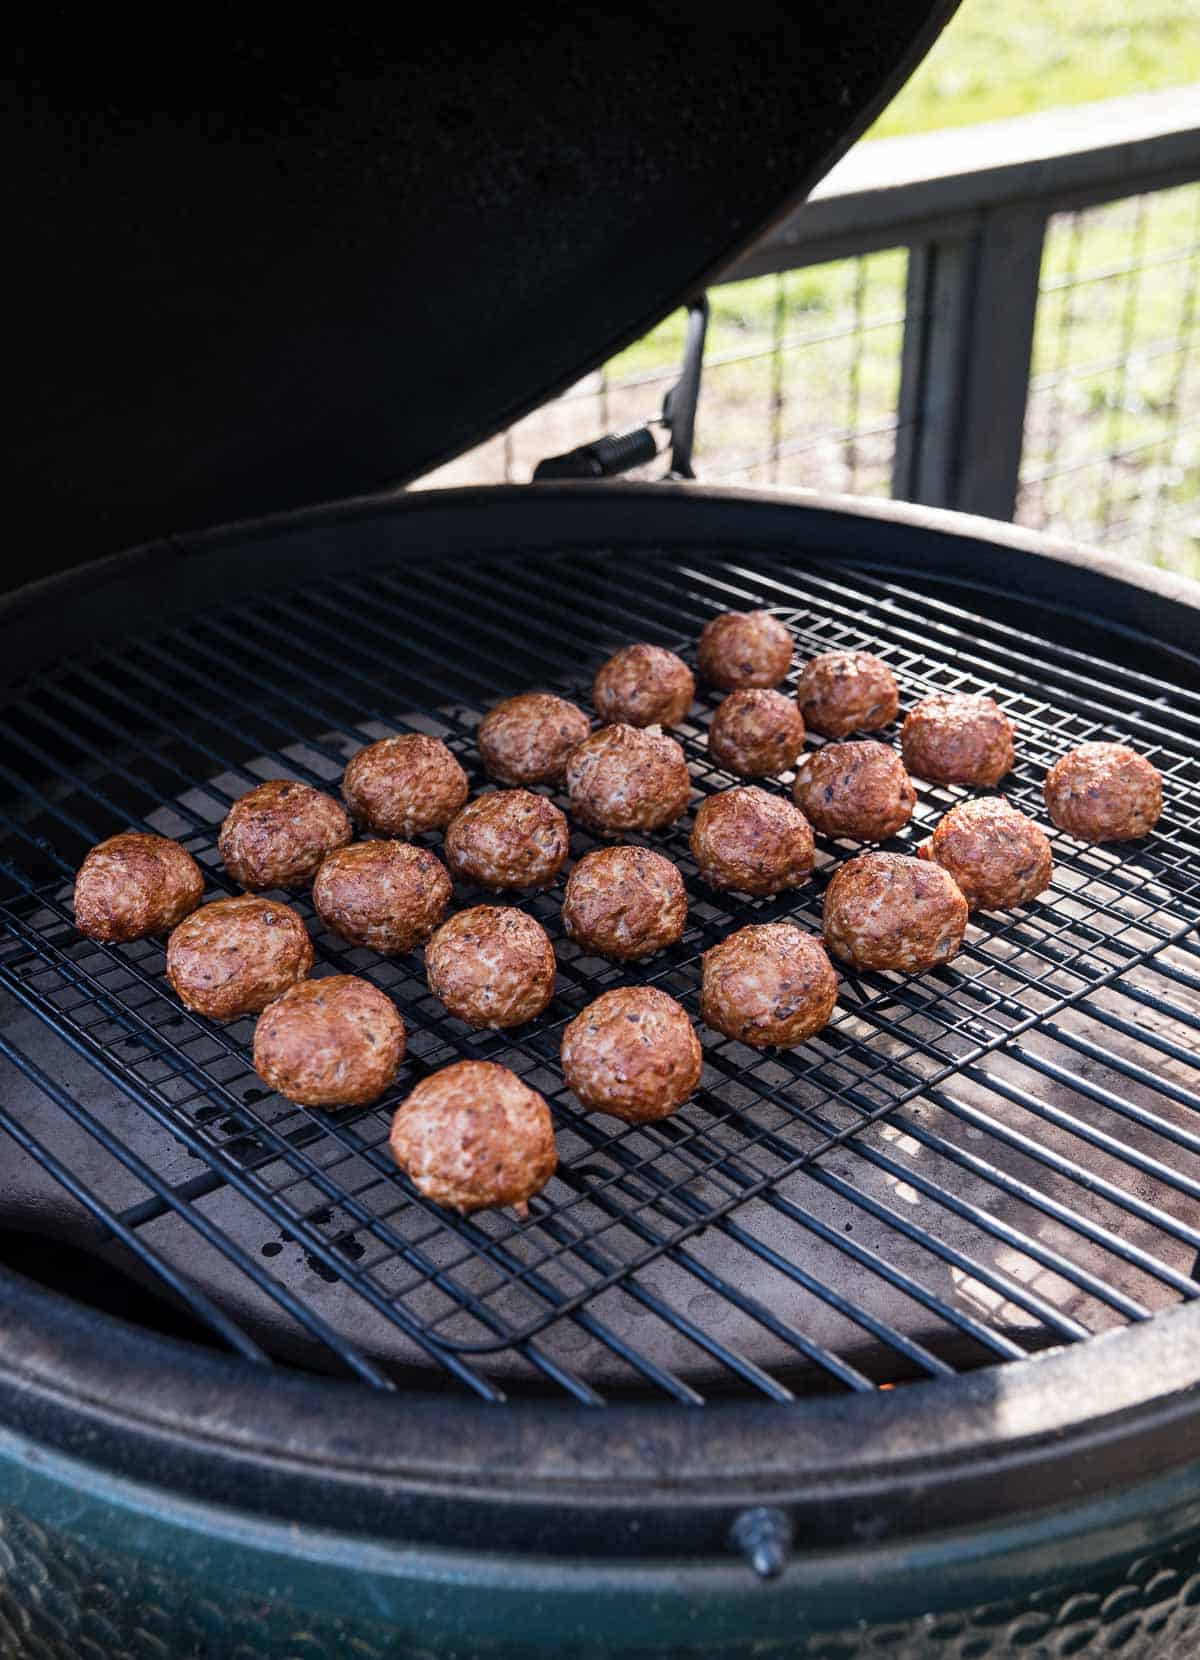 Turkey meatballs on the smoker just before being pulled off and with no sauce on them.